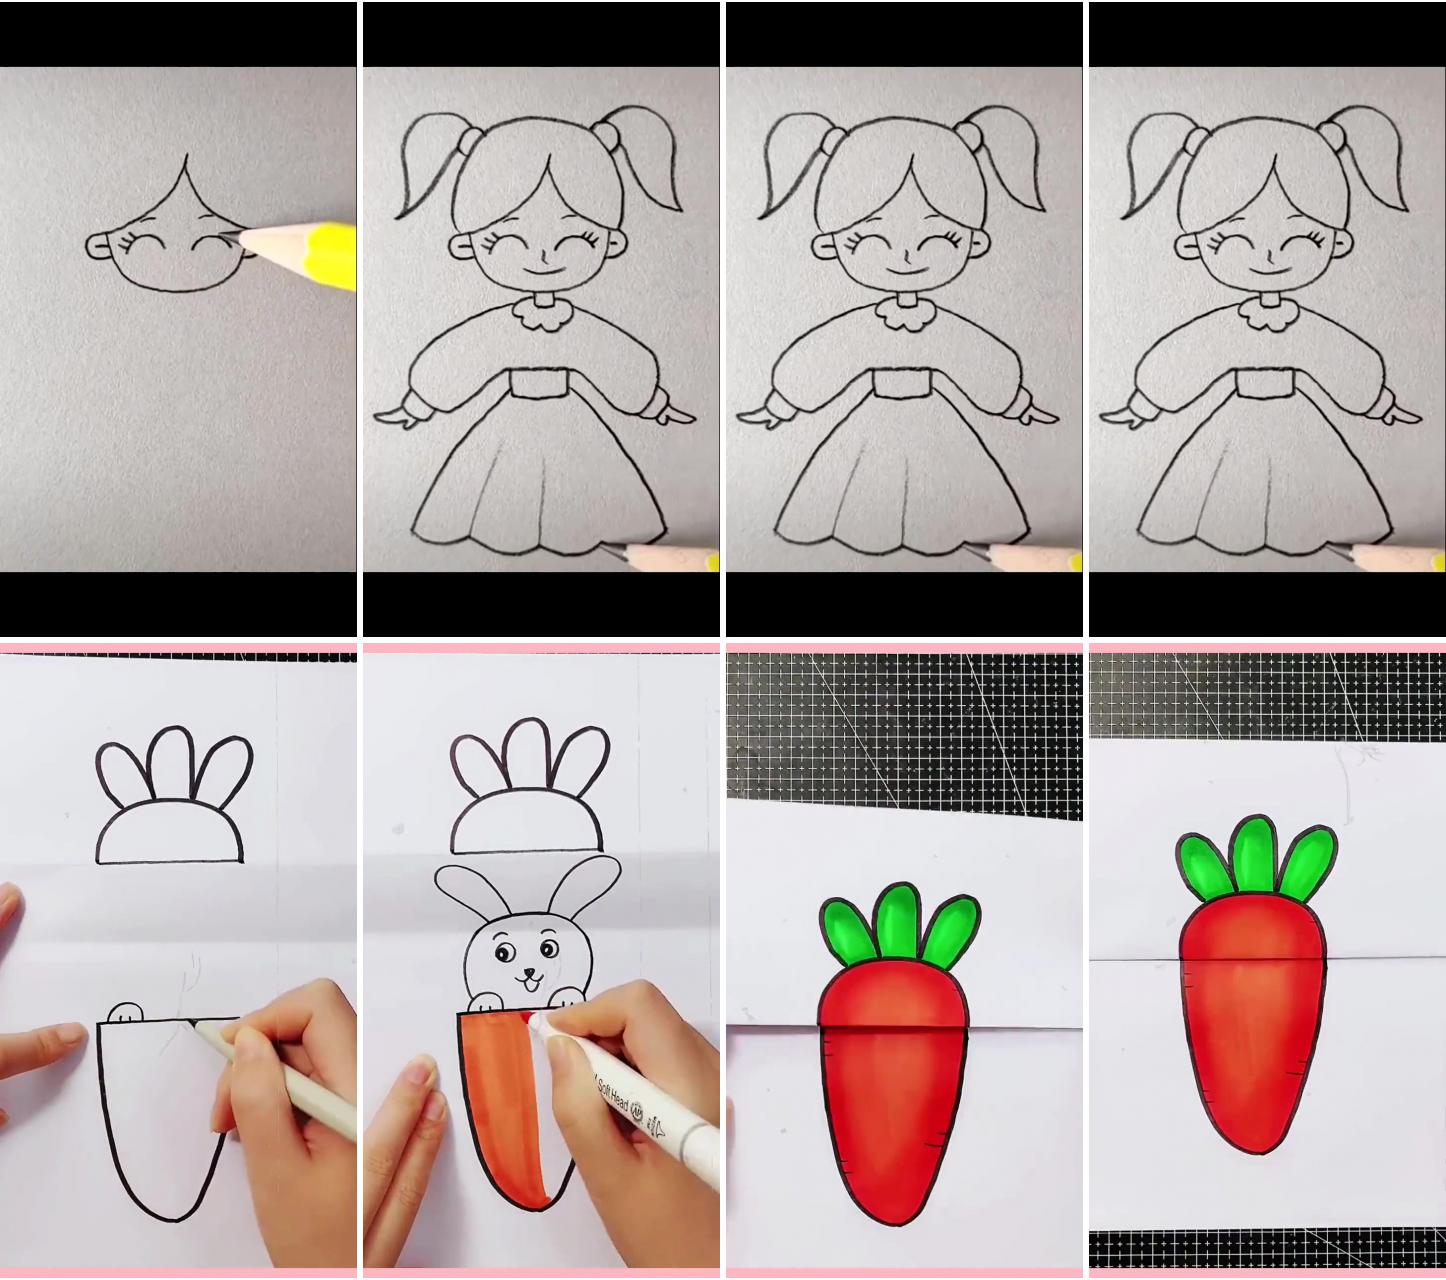 Girl drawing easy | how to draw a carrot - easy drawing tutorials